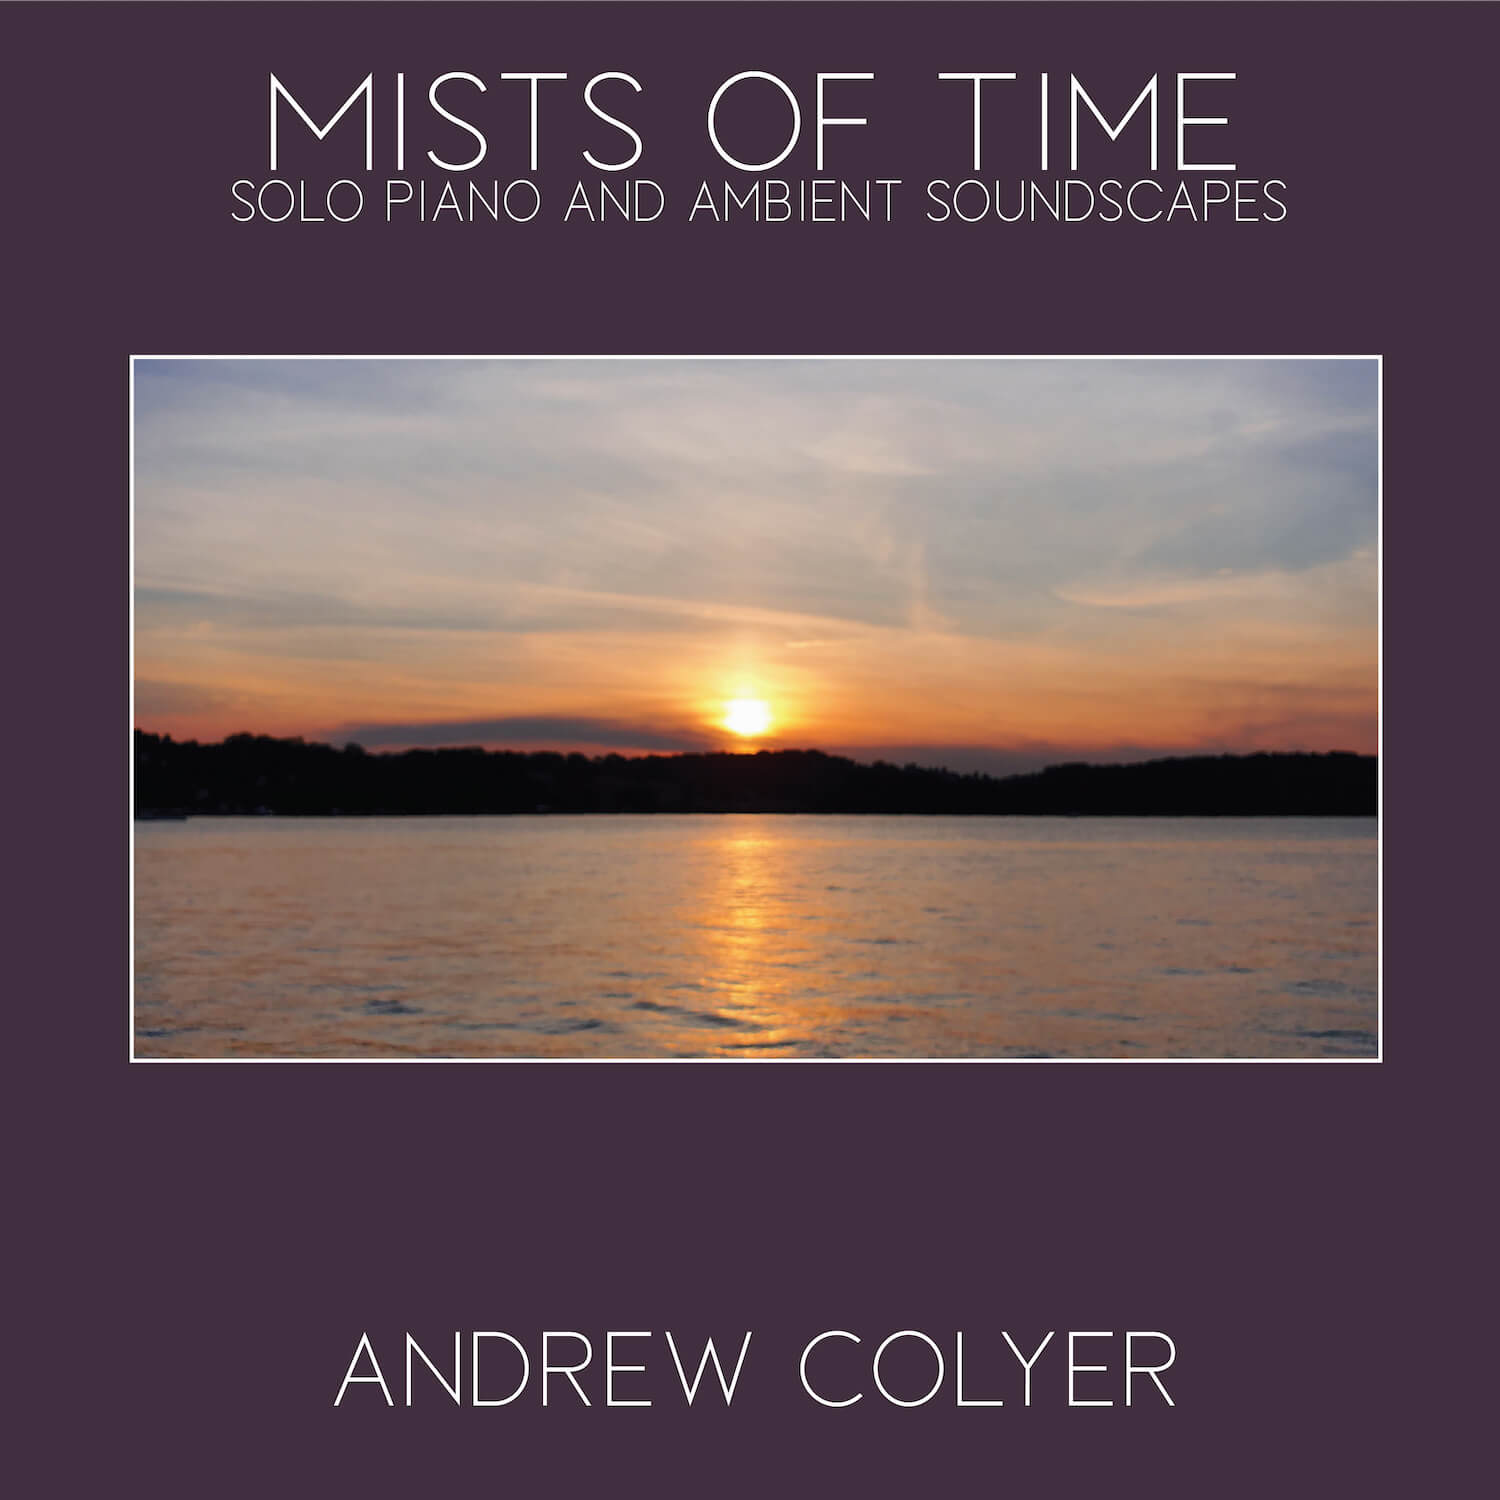 Absolutely elegant soundscapes Andrew Colyer